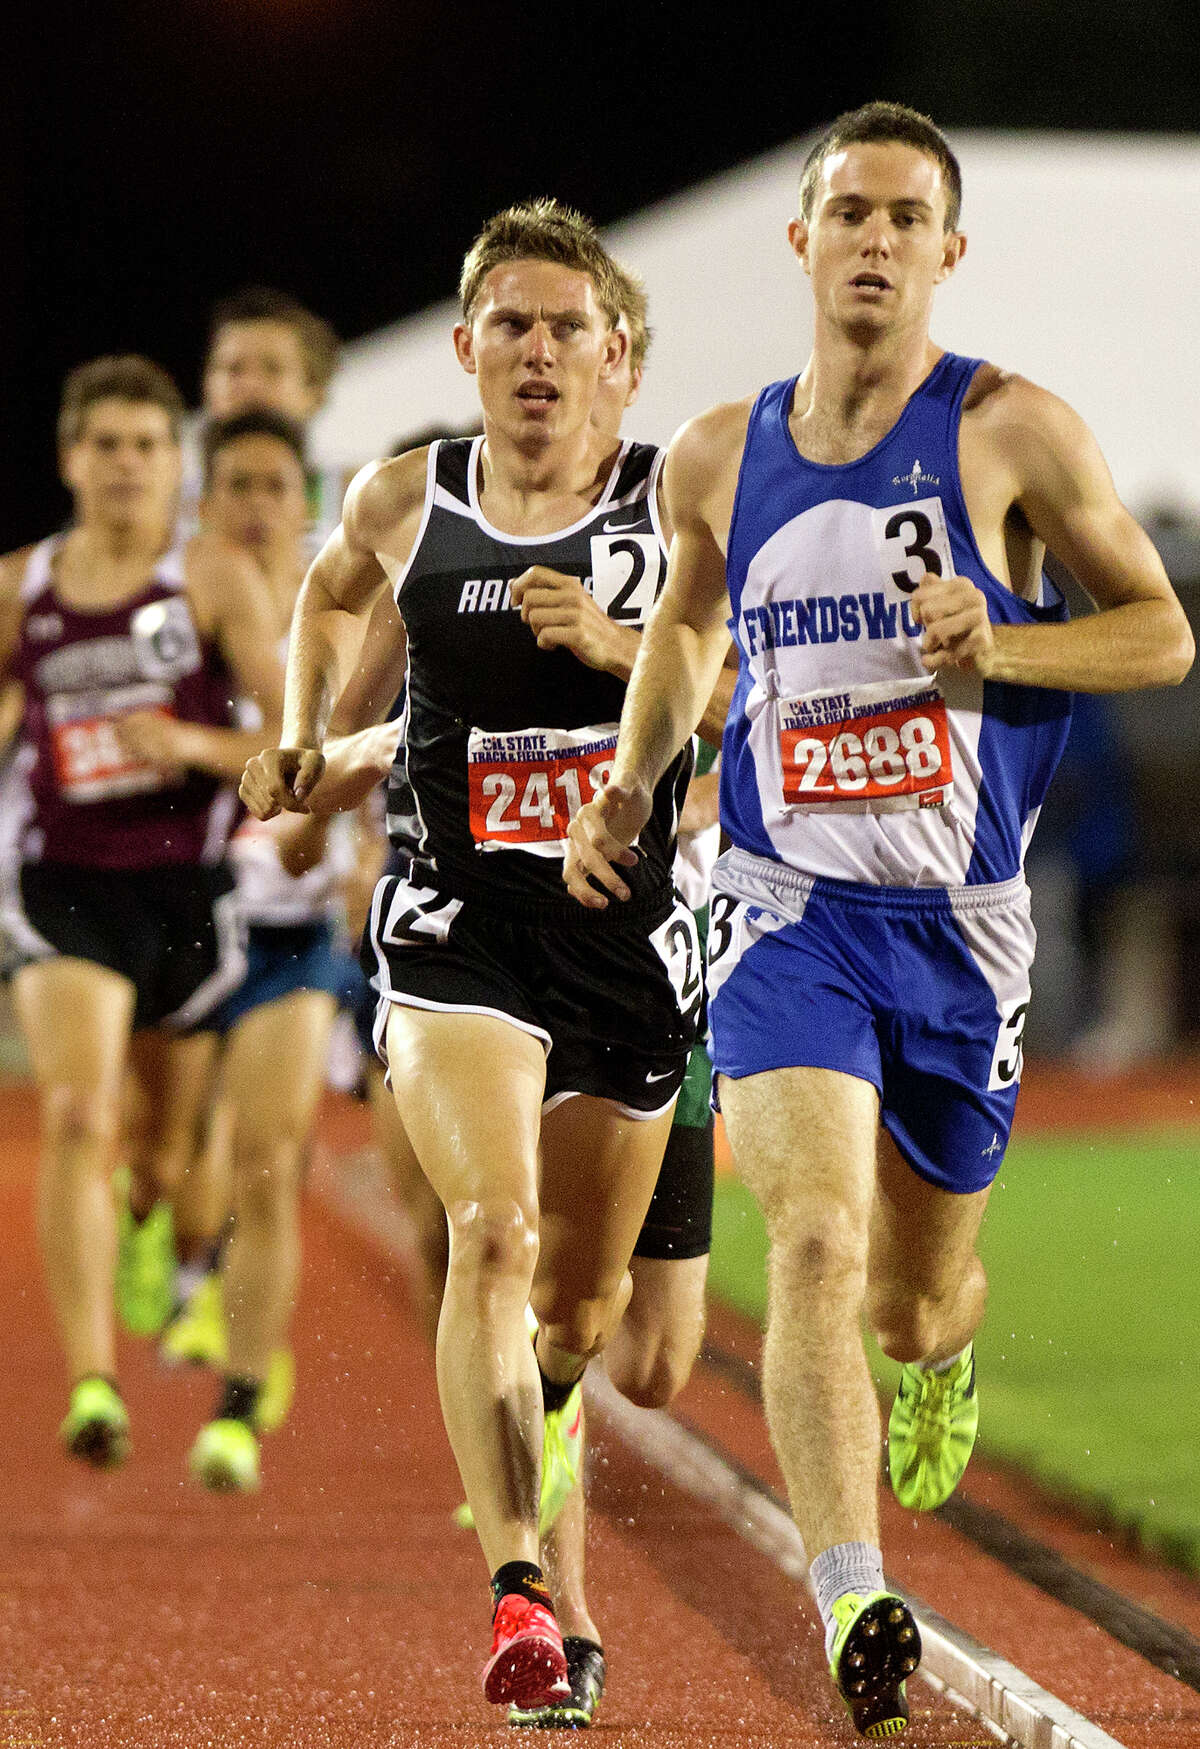 As exemplified by Ryan Teel, right, leading the way to a first-place finish in the 1,600-meter run at the state meet, Friendswood again captured the gold medal among Class 4A sports programs.